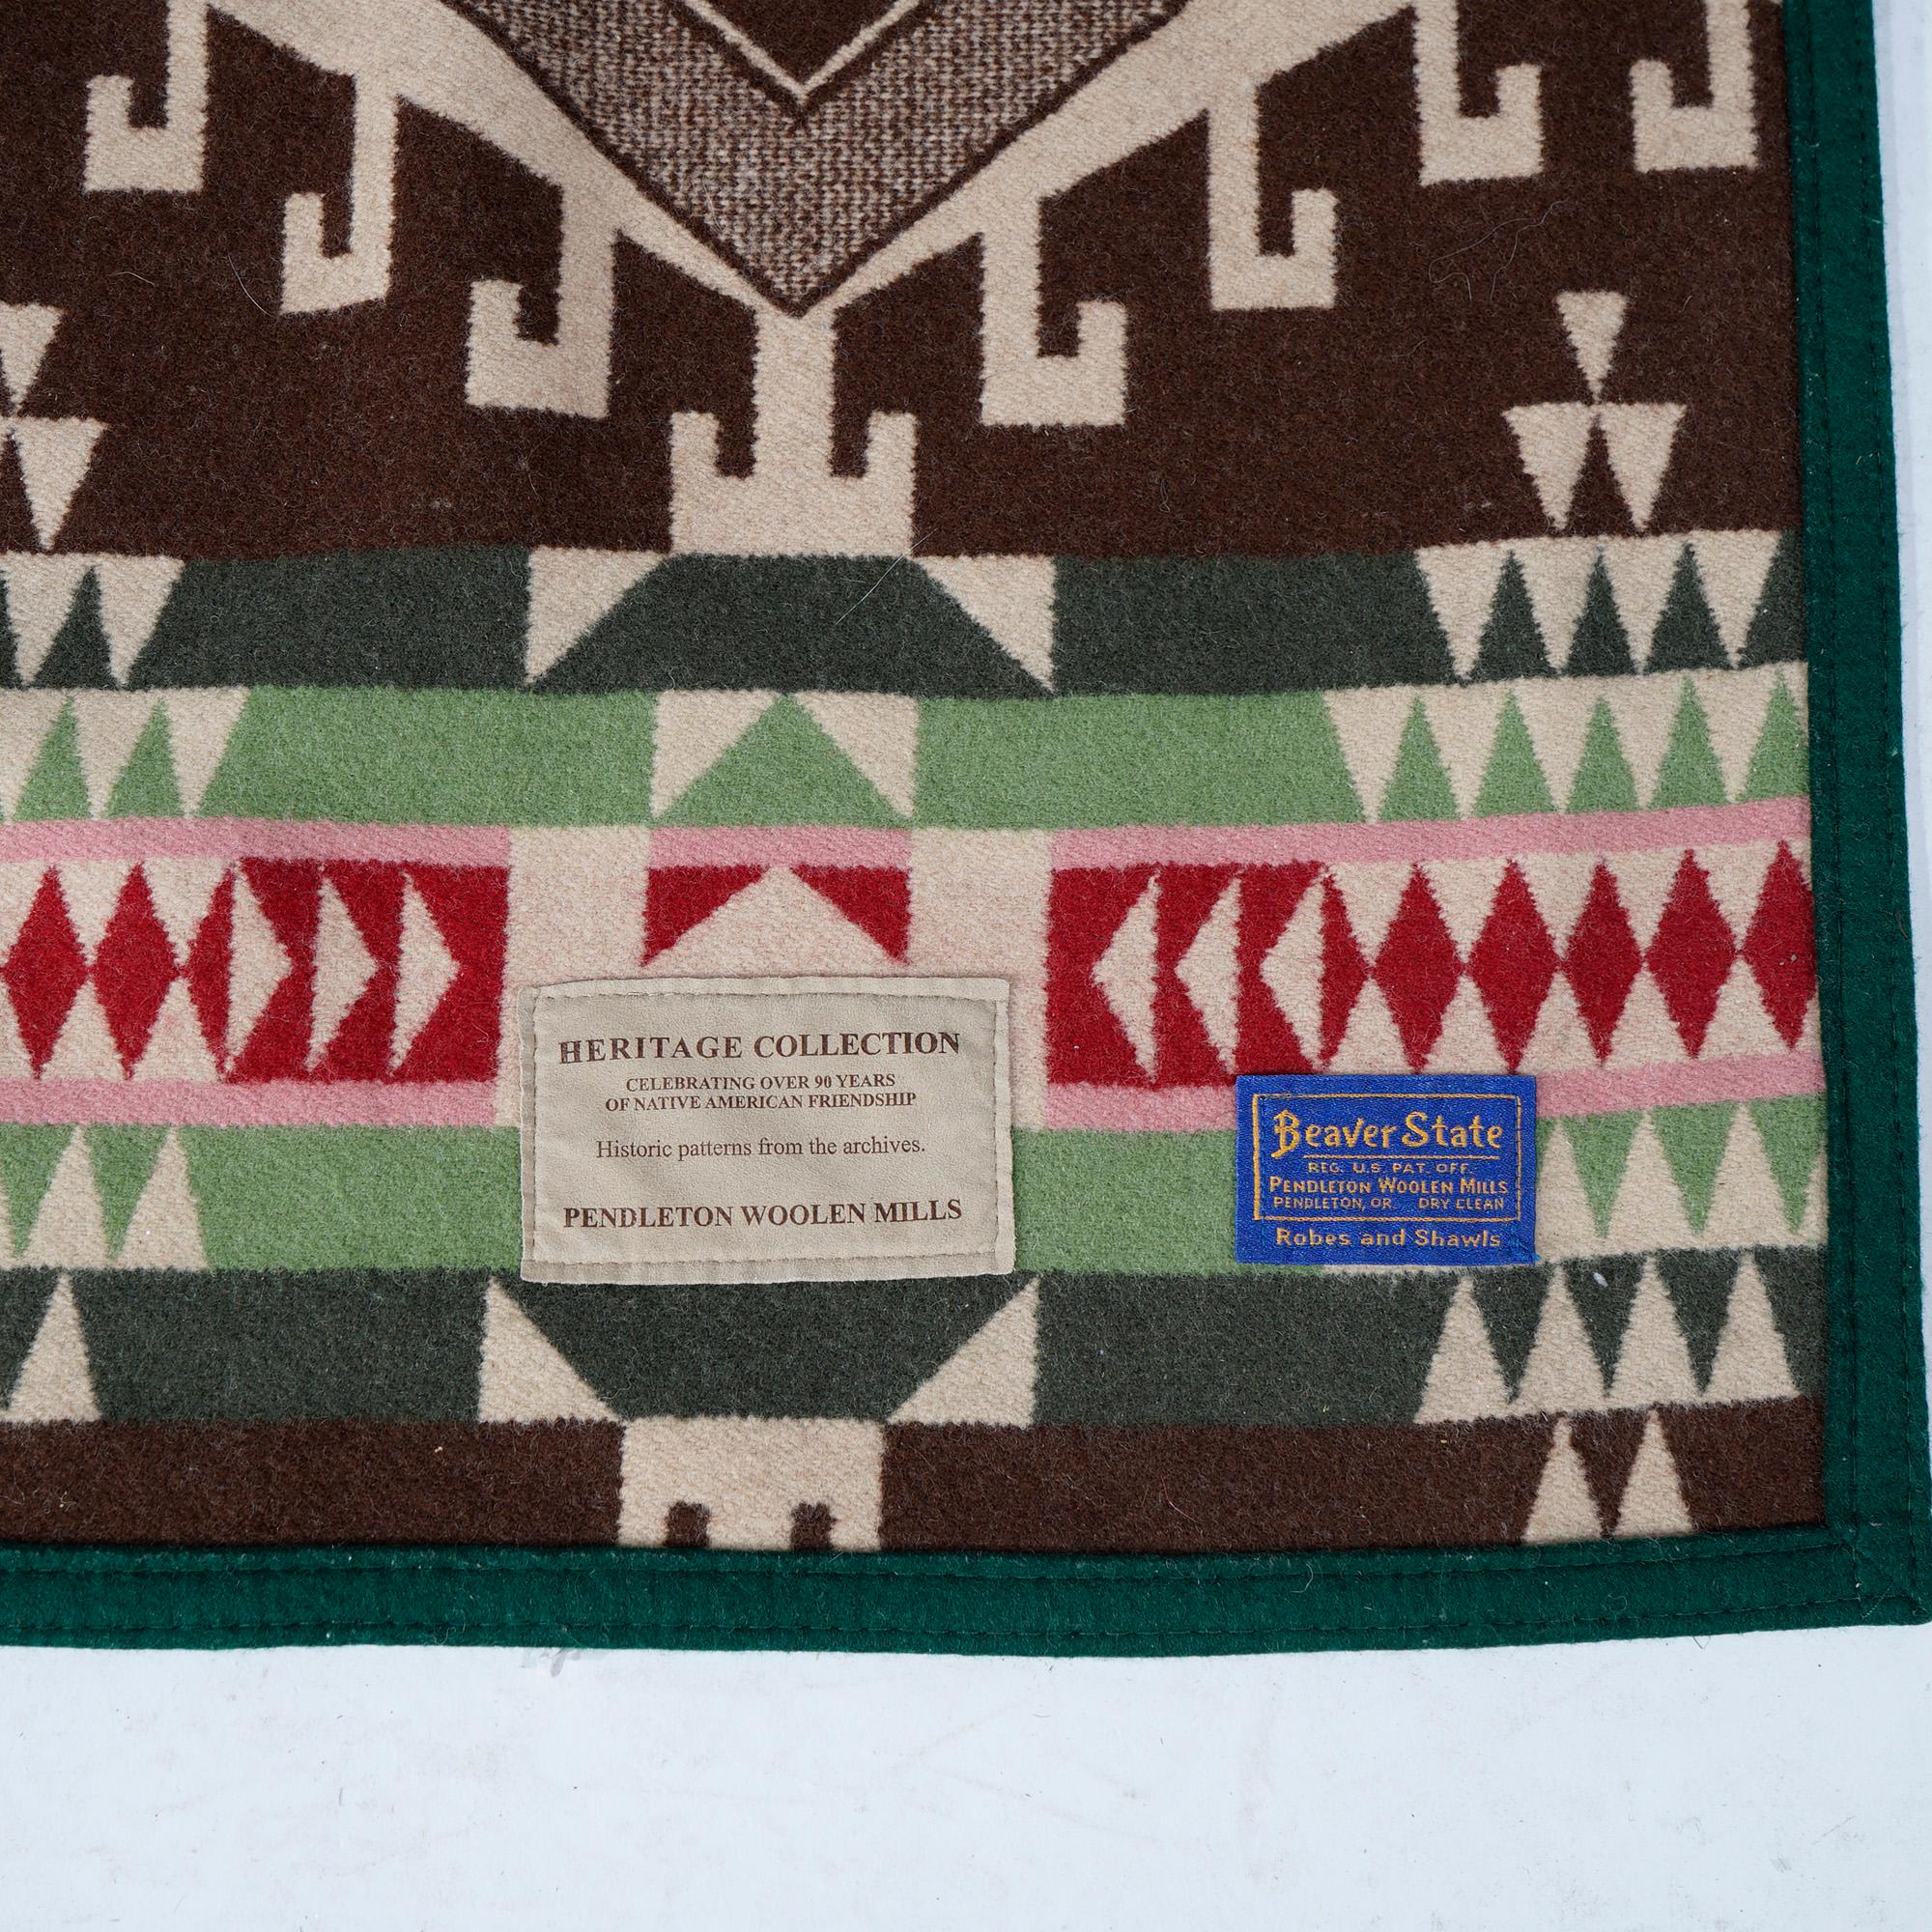 20th Century Arts & Crafts Southwest Style Pendleton Heritage Collection Wool Blanket 20th C